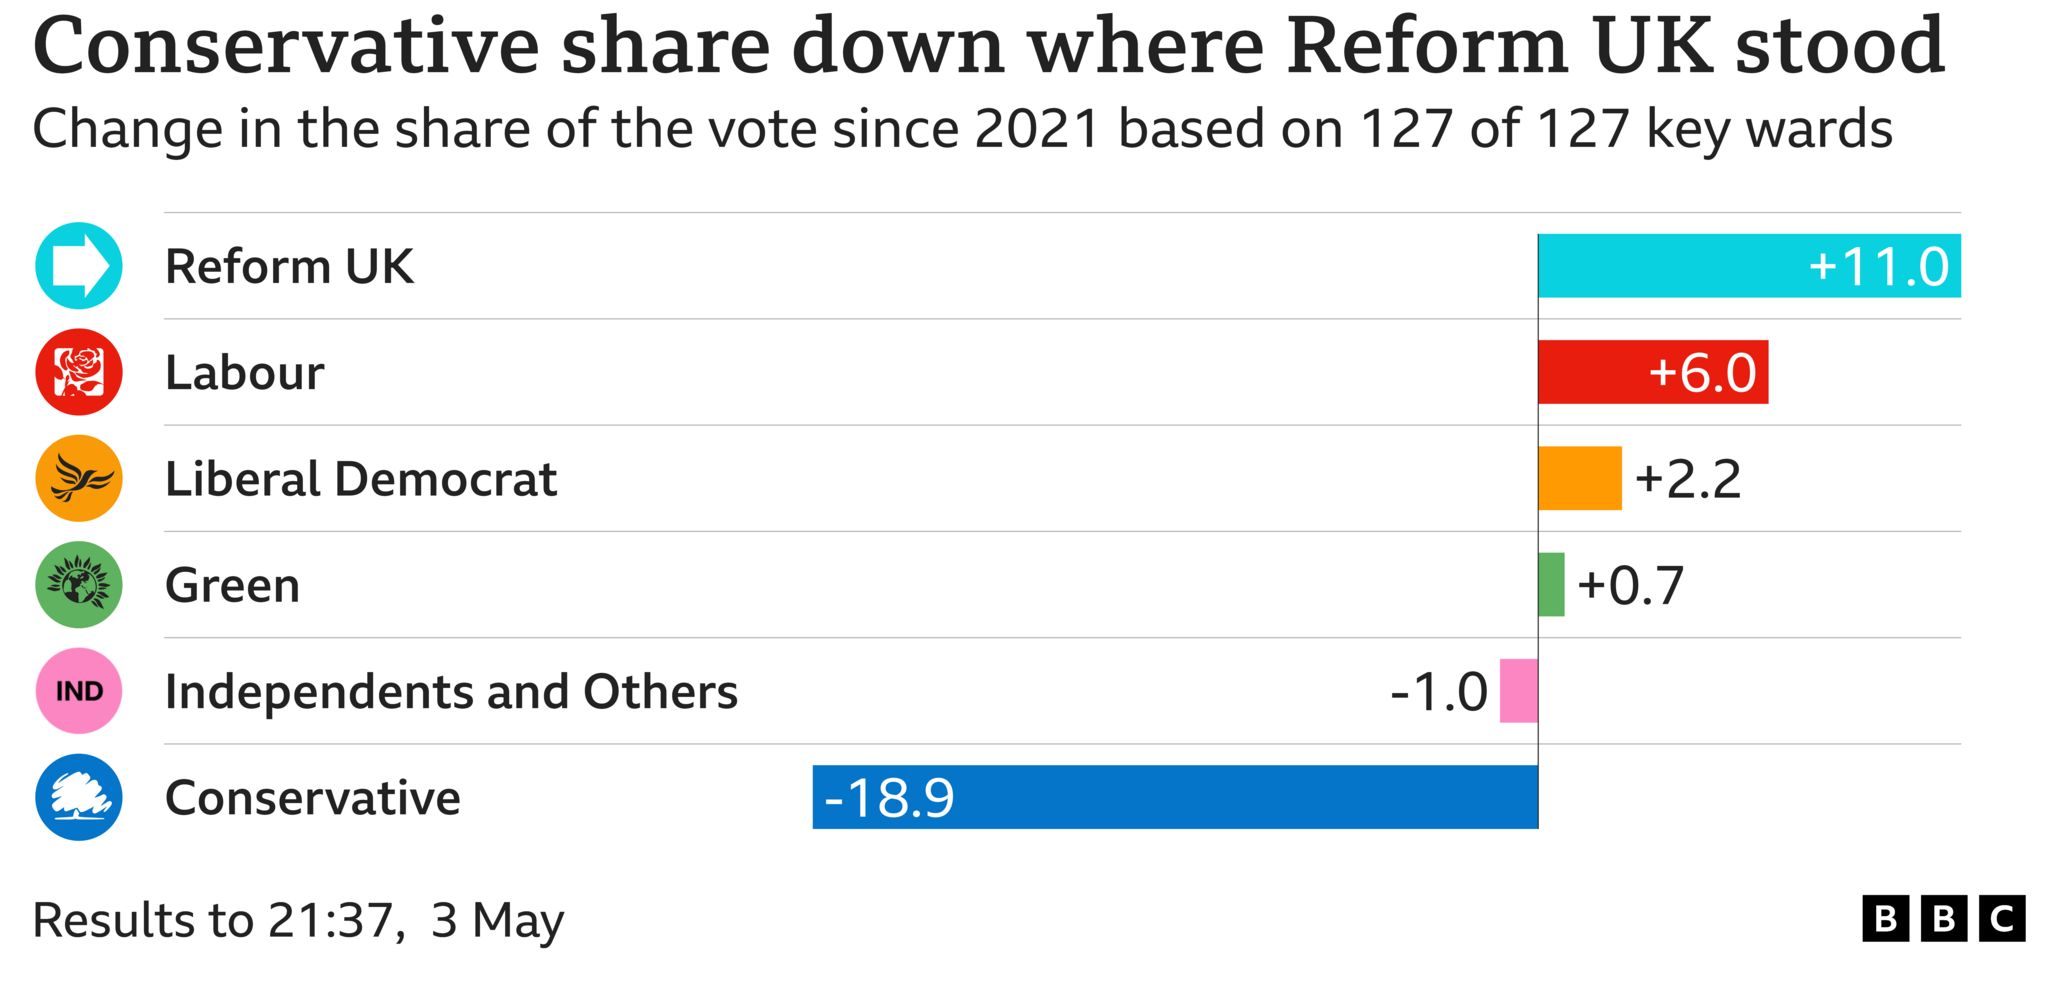 Chart showing change in share of the vote in Ref UK standing . Reform UK change in the share of the vote  11.0, Labour change in the share of the vote   6.0, Liberal Democrat change in the share of the vote   2.2, Green change in the share of the vote   0.7, Independents and Others change in the share of the vote  -1.0, Conservative change in the share of the vote -18.9